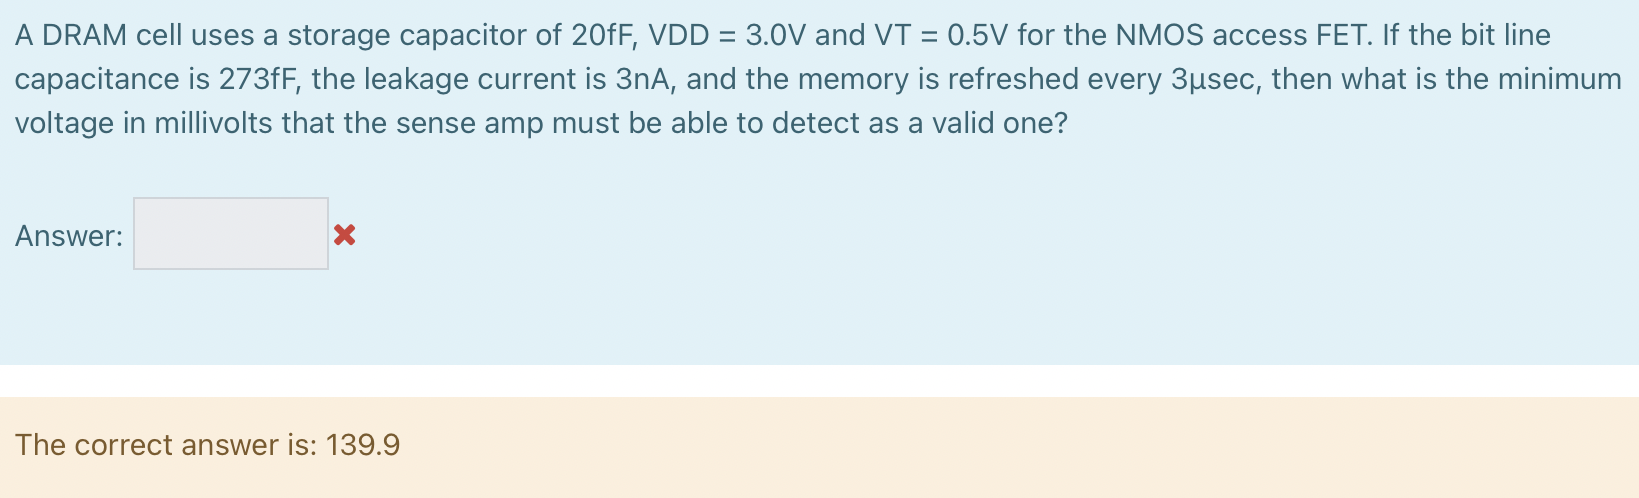 A DRAM cell uses a storage capacitor of 38 fF, VDD = 2.5 V and VT = 0.